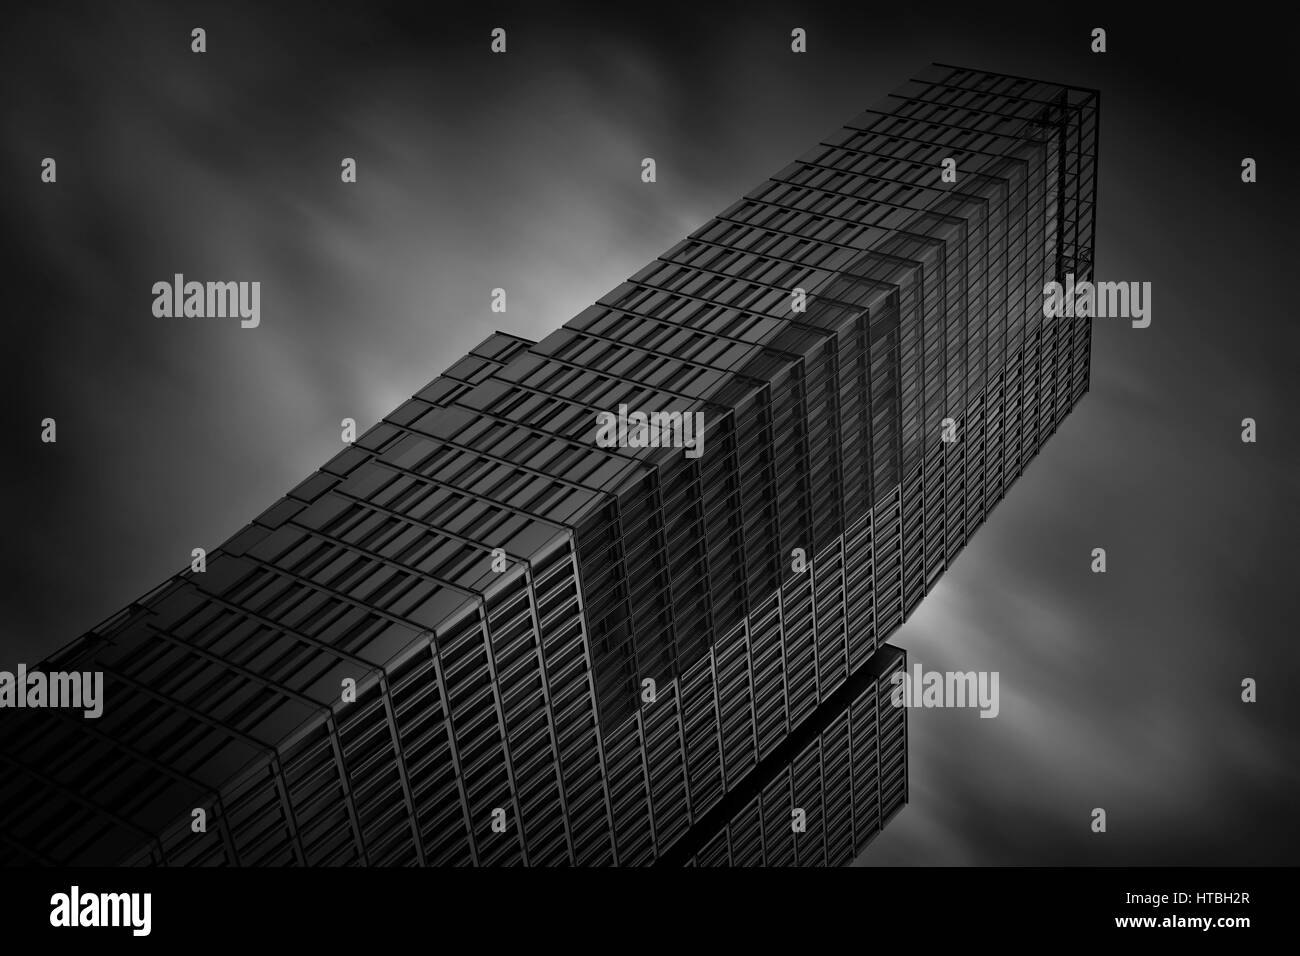 Black and white capture of the Nextower building in Frankfurt am Main, Germany Stock Photo